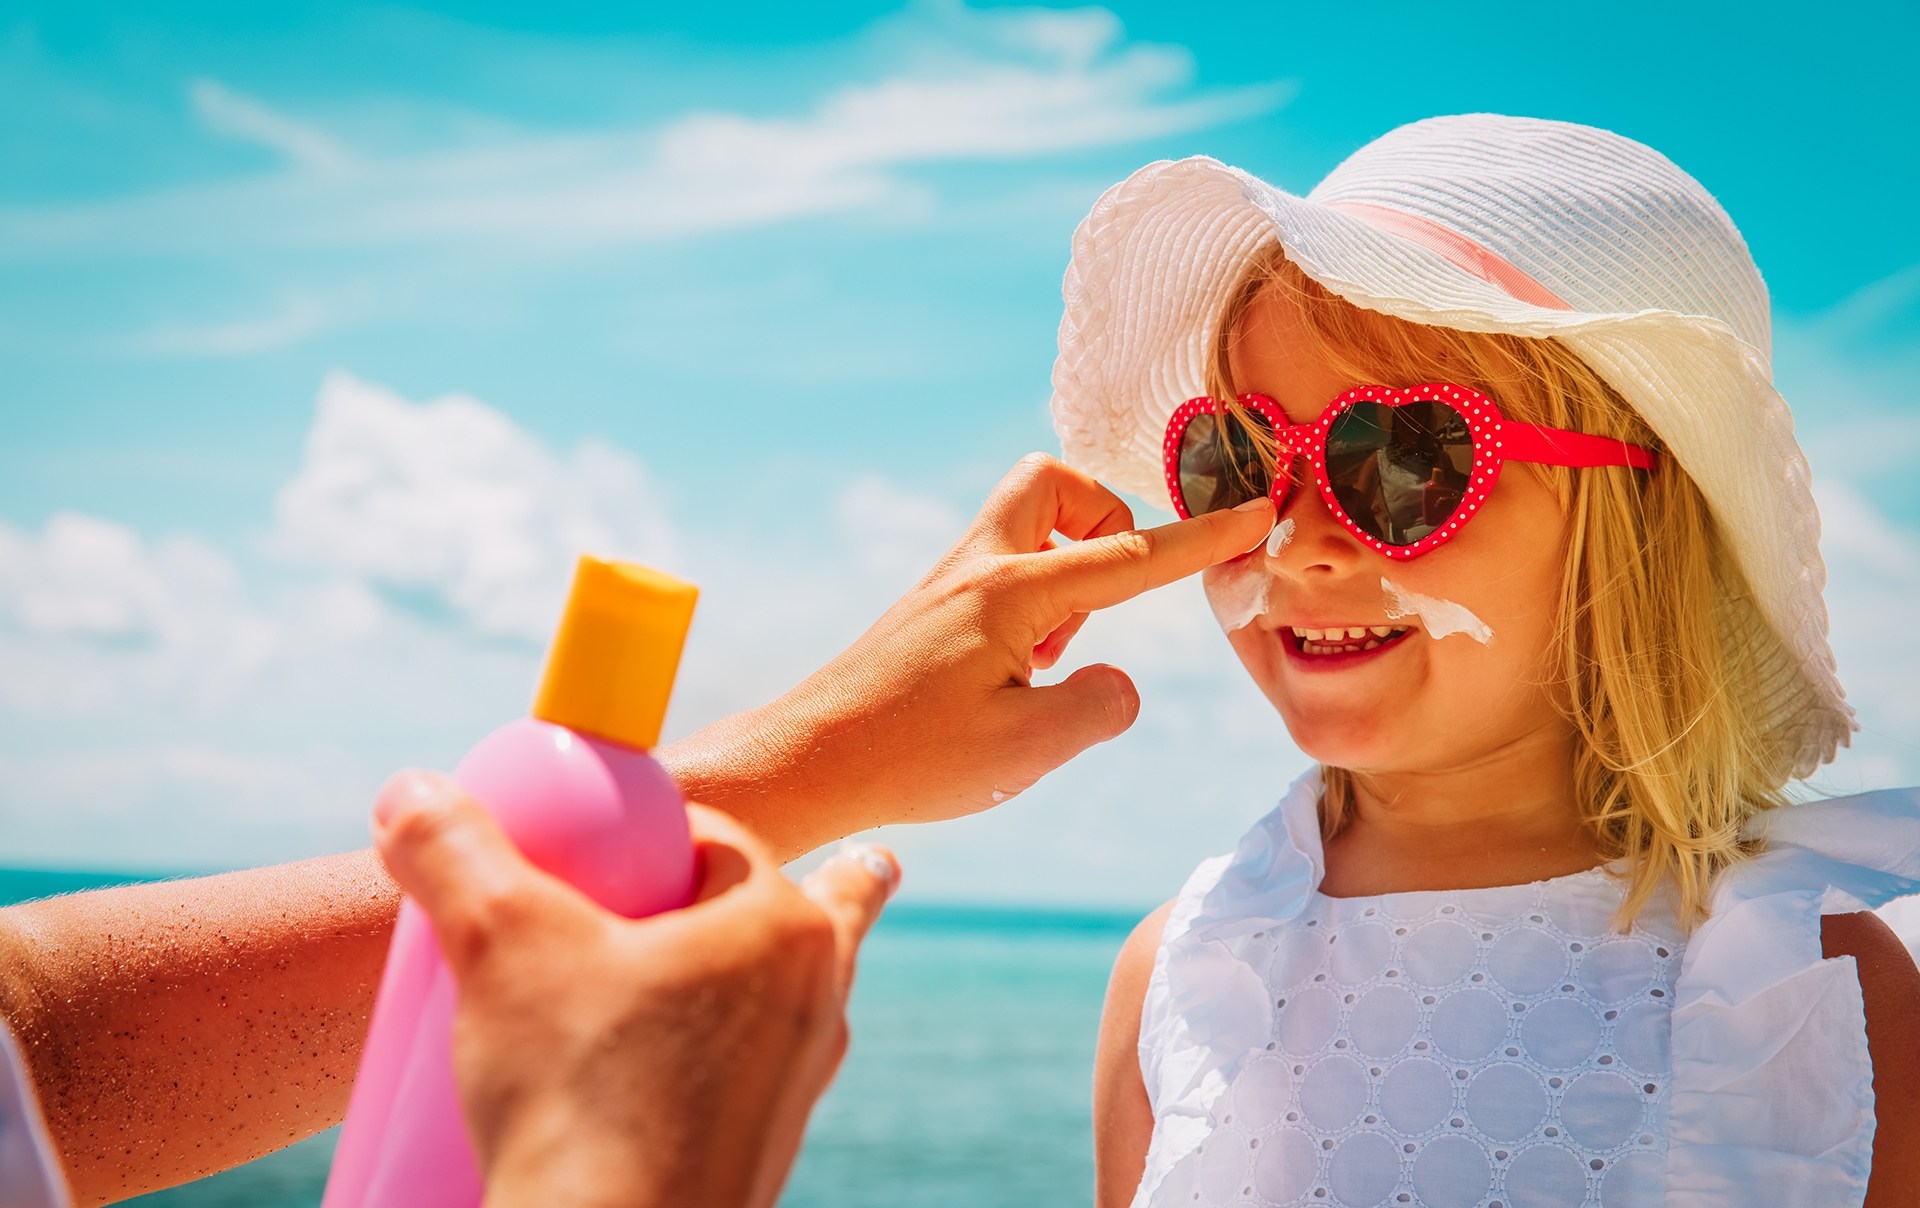 It’s Summer—Watch Out for Harmful UV Rays | HealthDiscovery.org